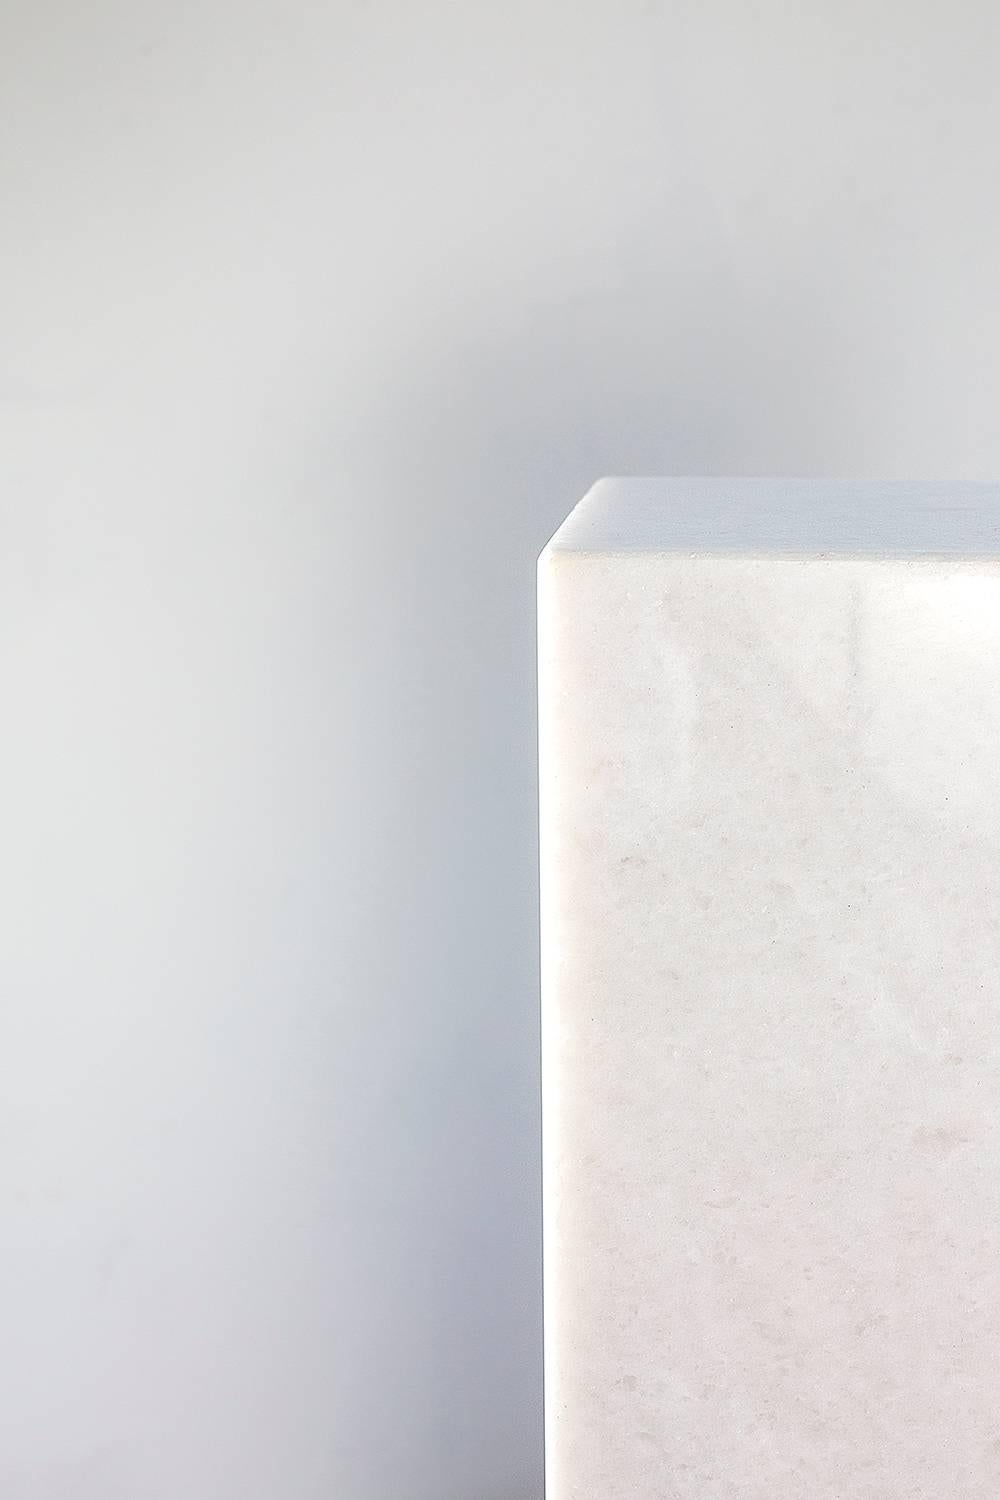 This unique pedestal is a part of the Meta limited edition collection of one-of-a-kind functional art pieces imbued with senses, memories and experiences that are beyond form and material.
The pedestal's minimalist clean design makes it a perfect